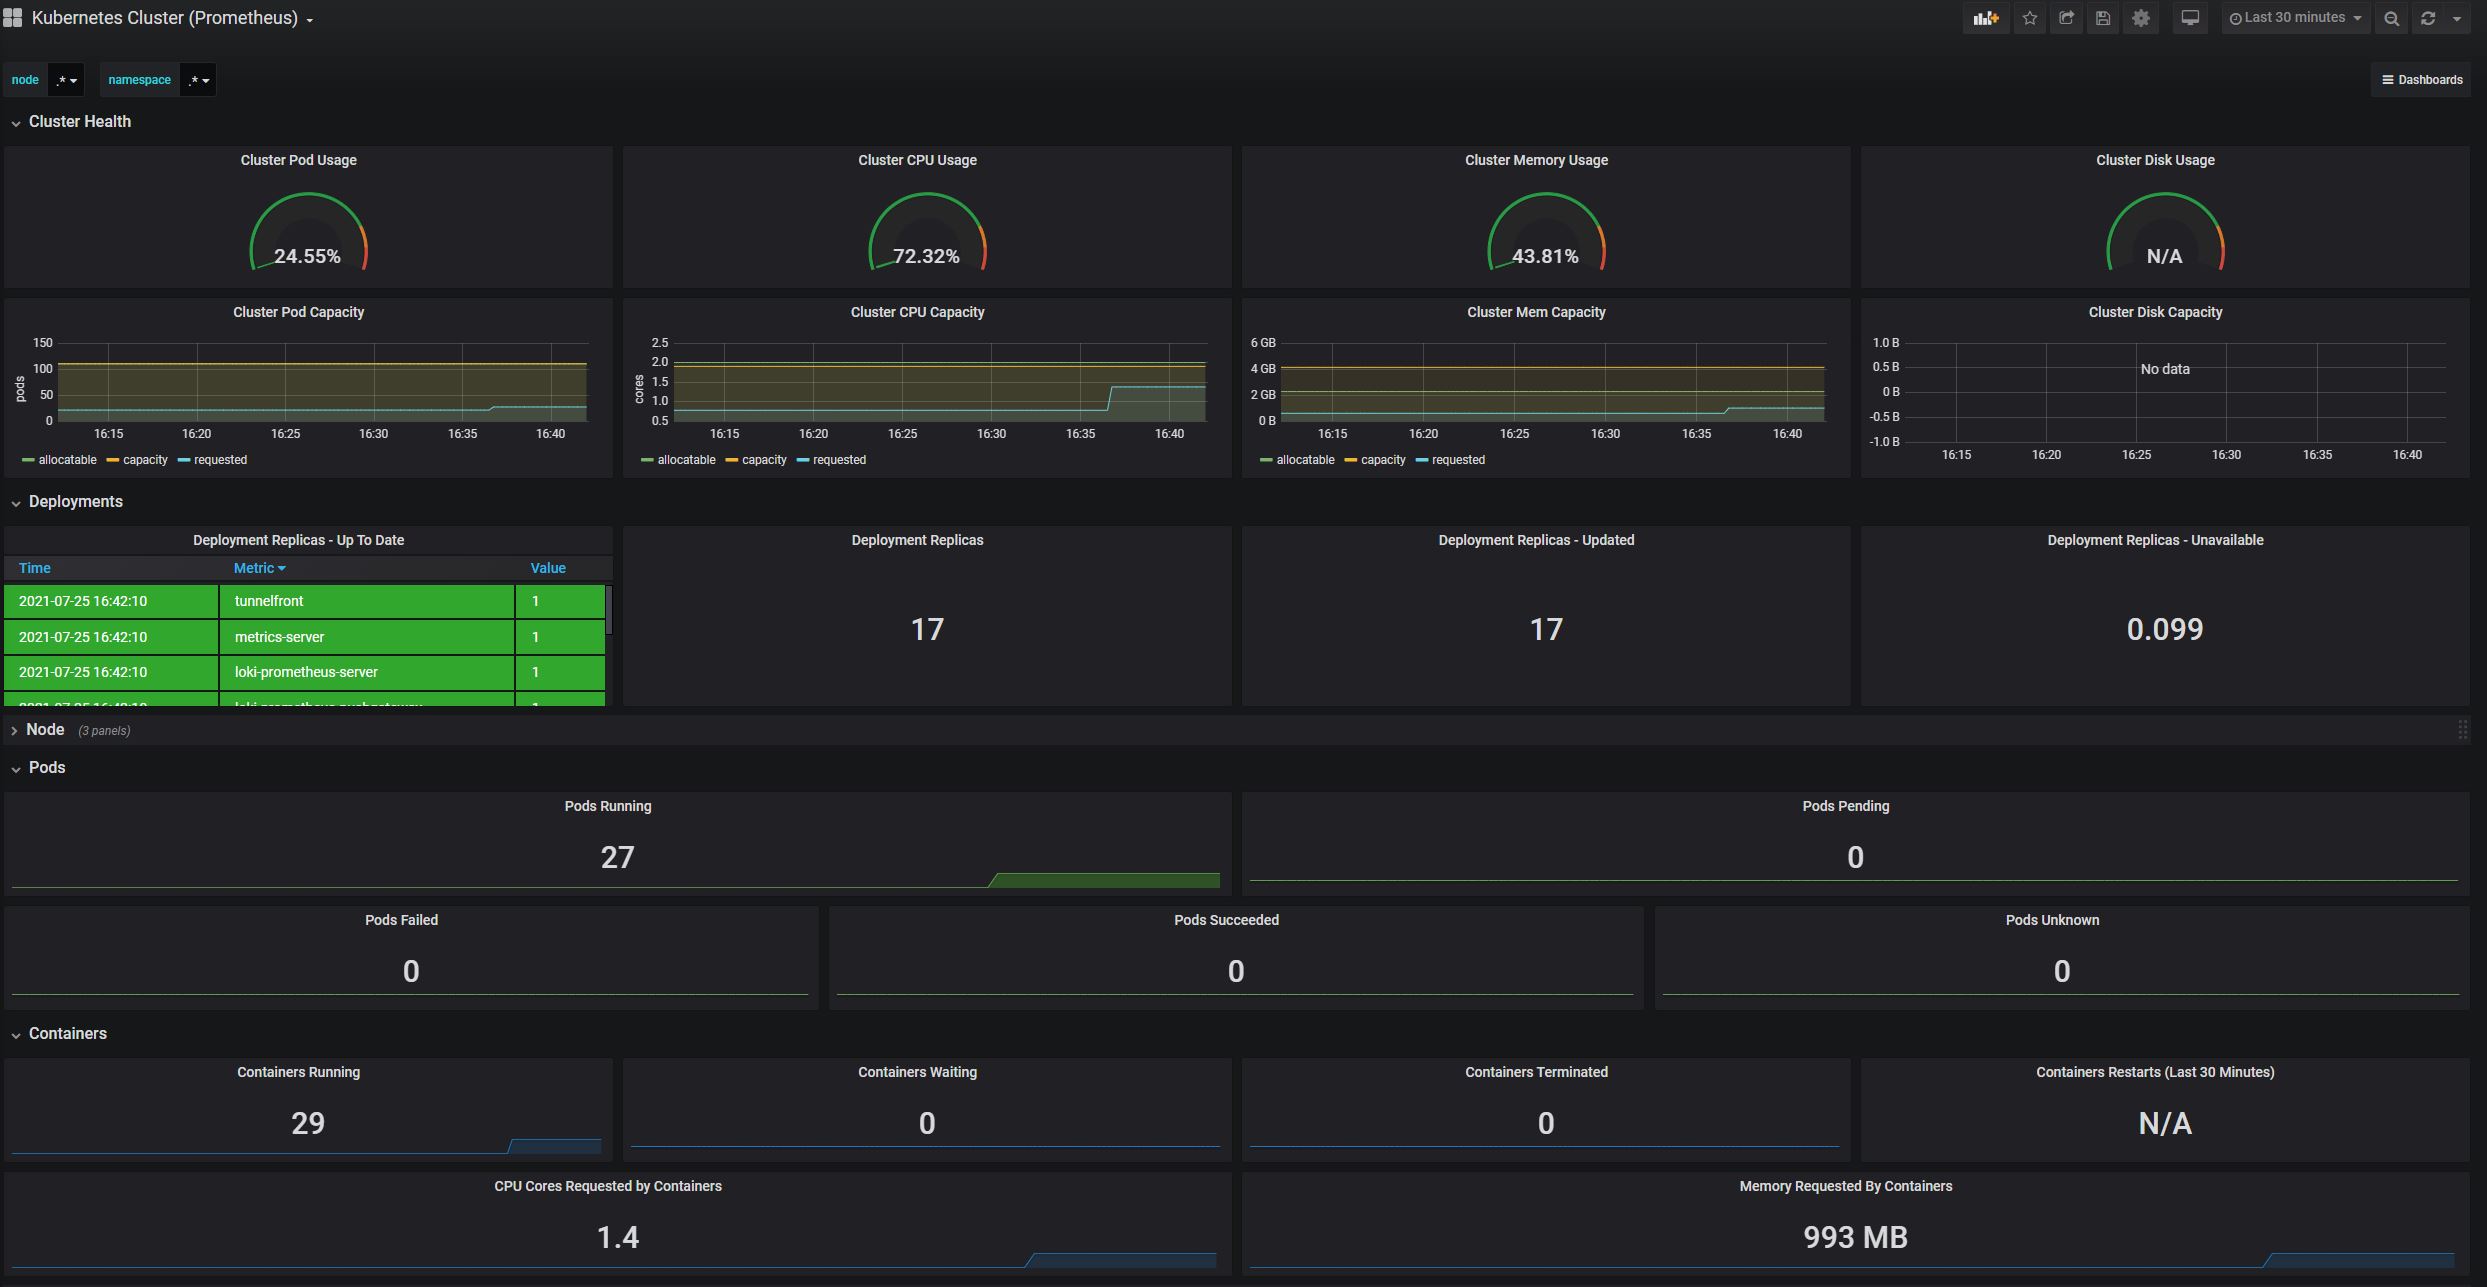 The Dashboard gives an Overview of the Kubernetes Cluster